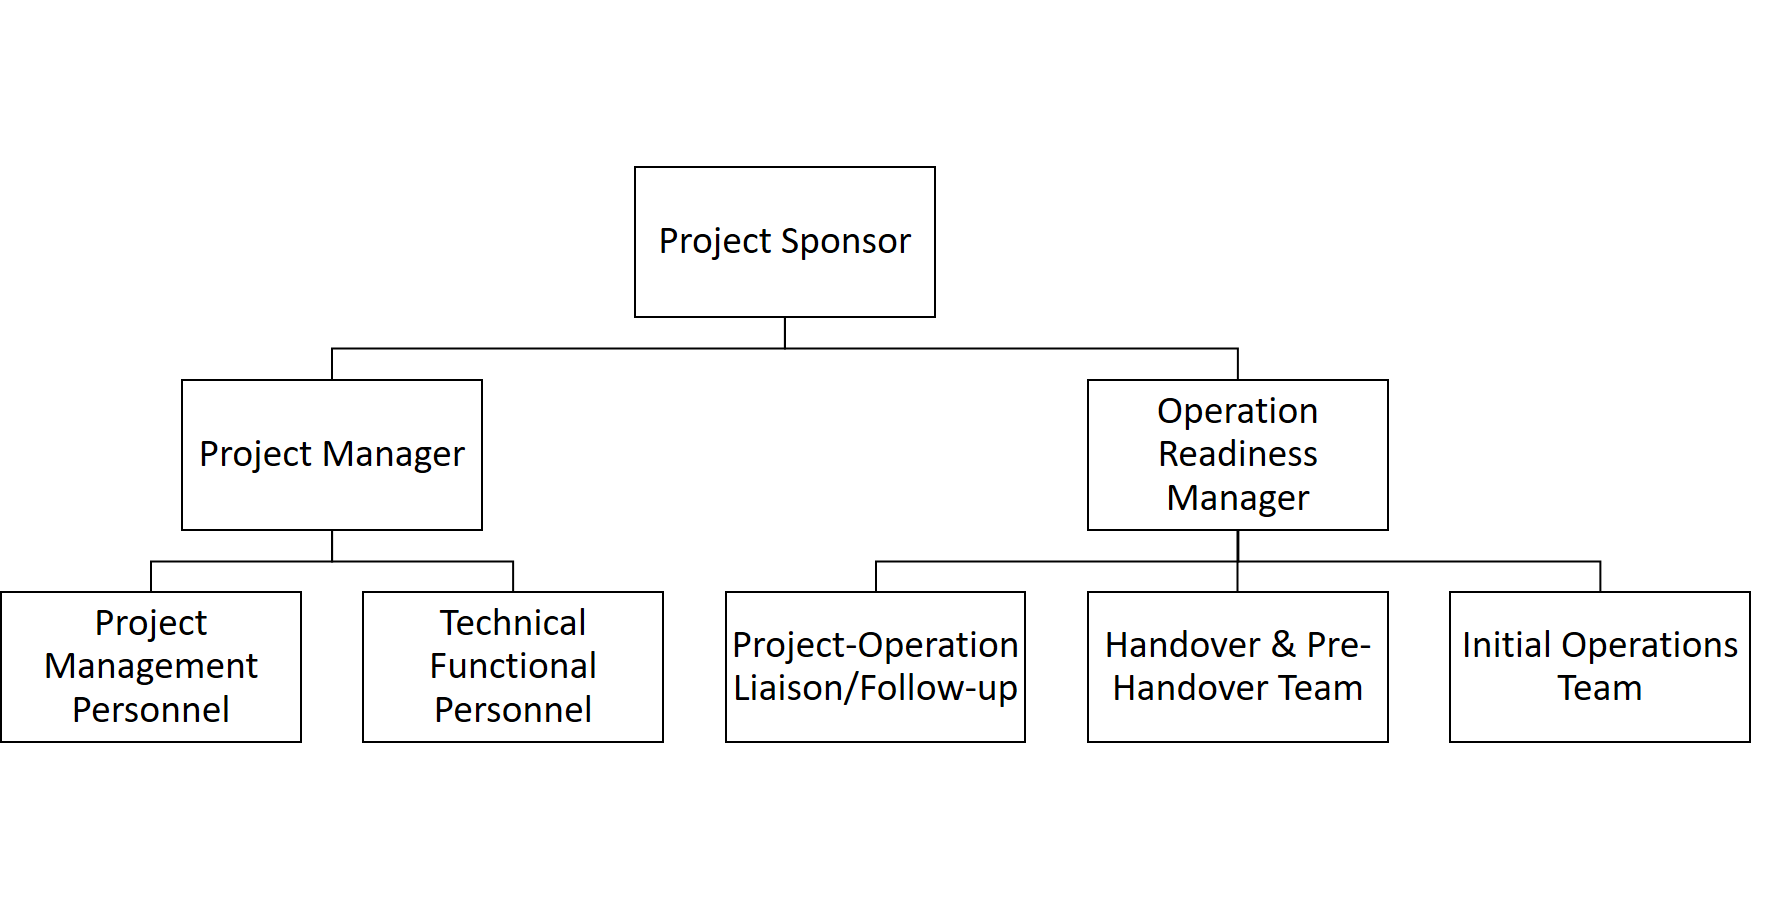 Who are the people involved in delivering a project?